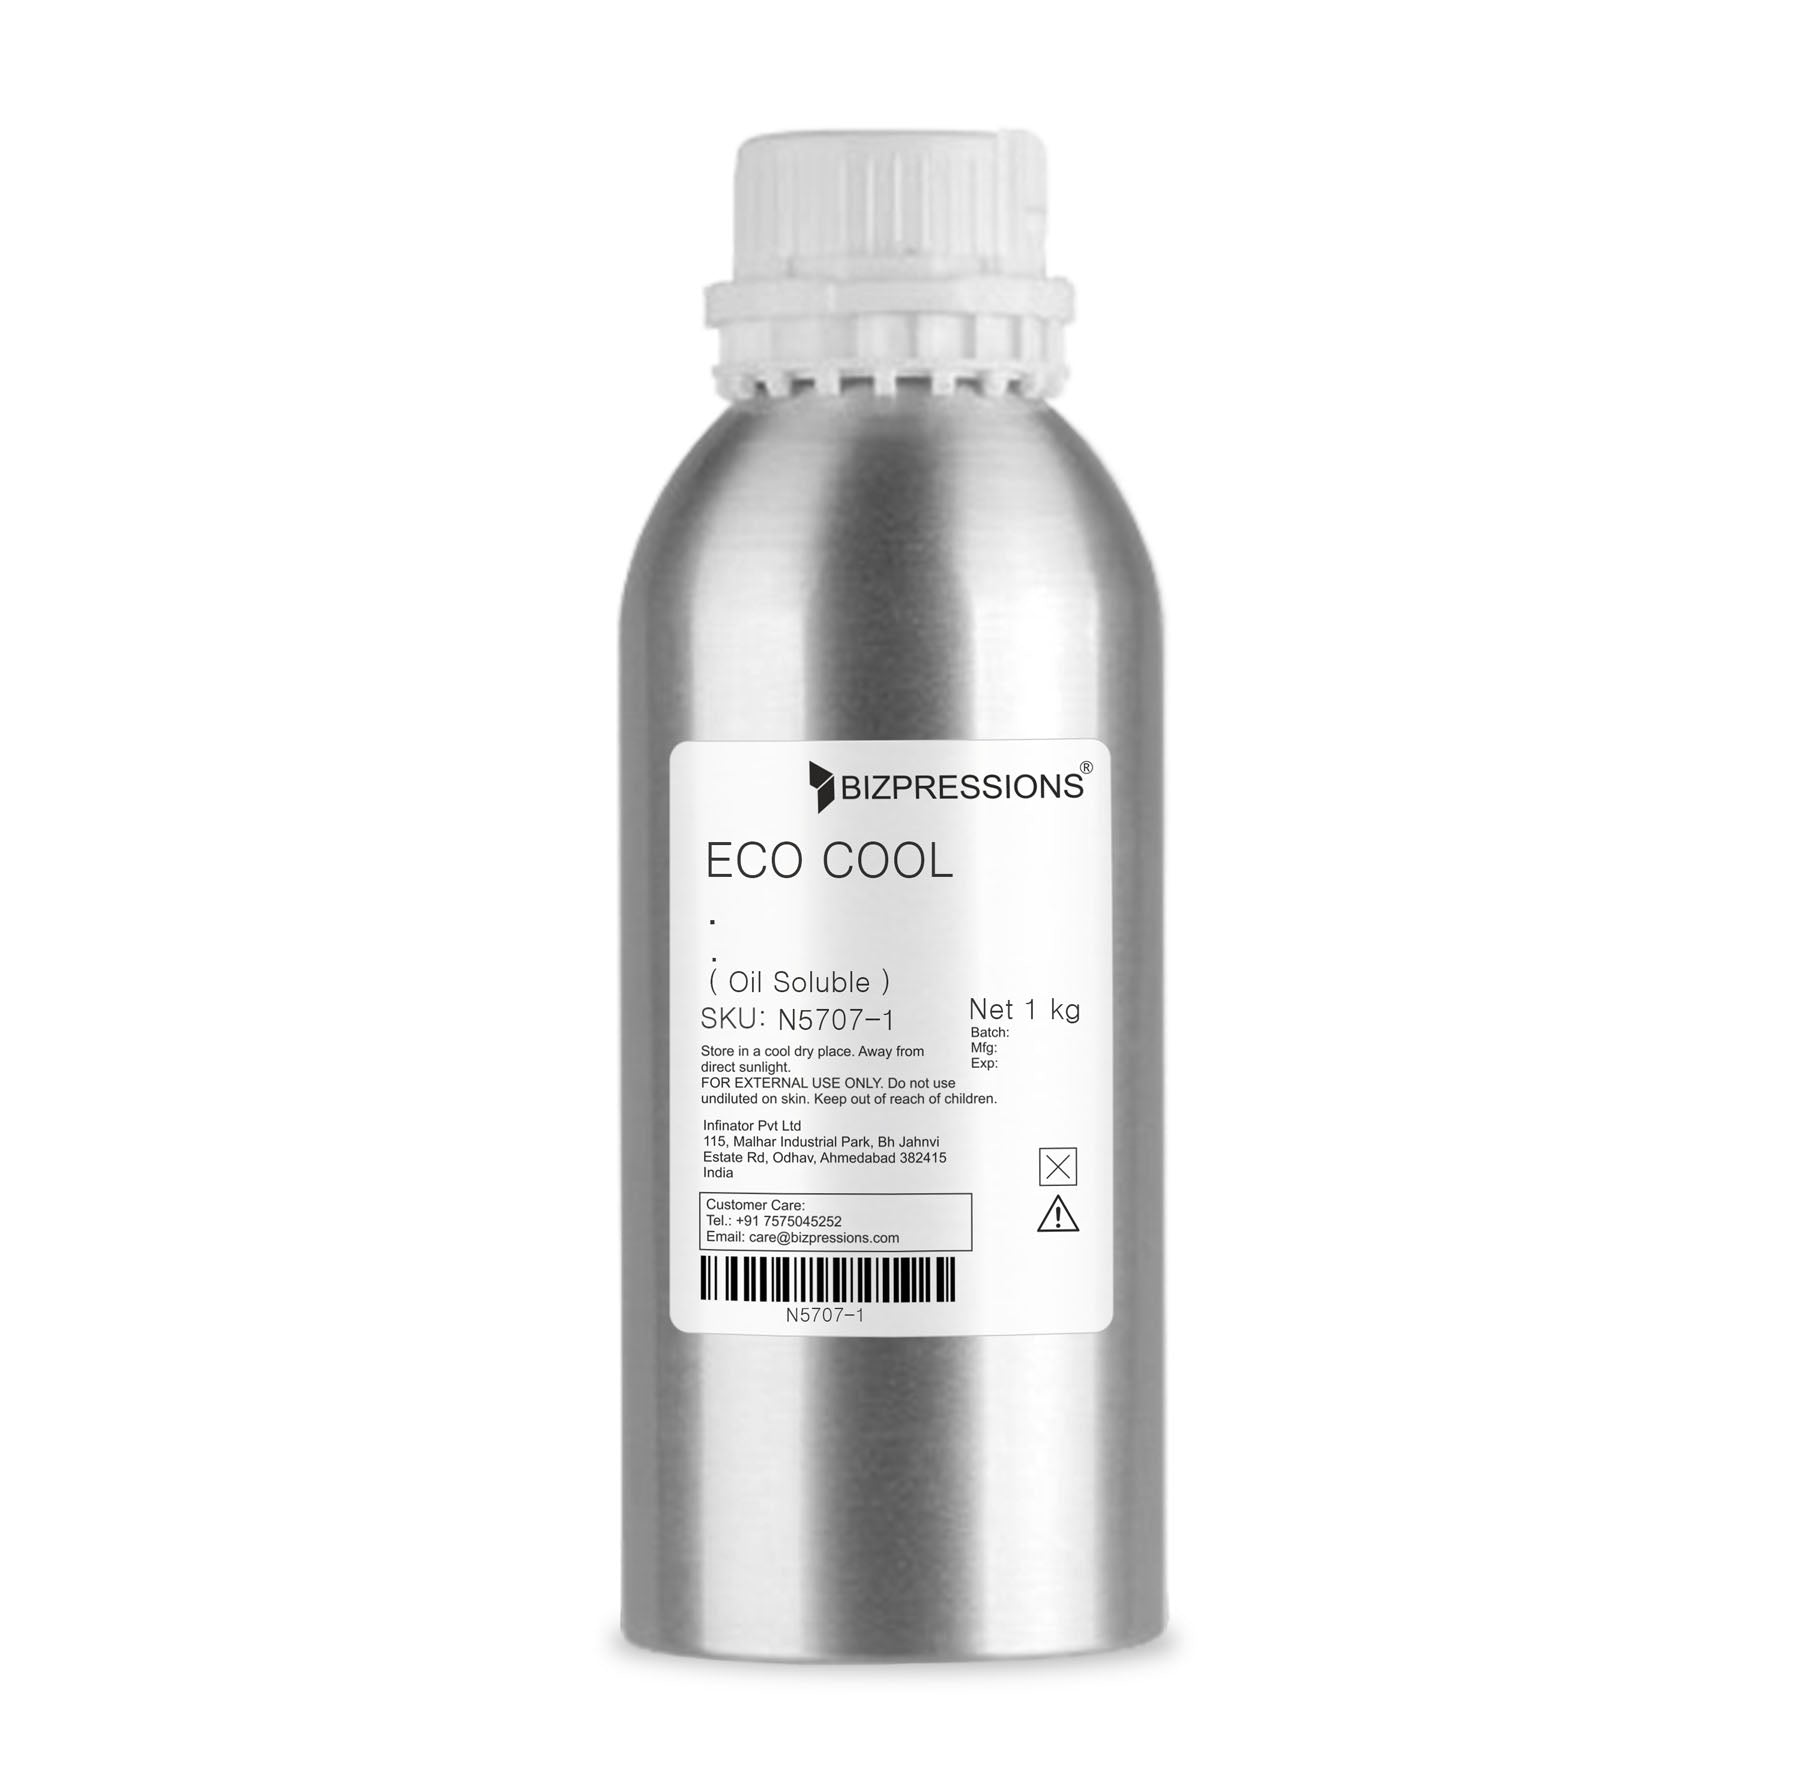 ECO COOL - Fragrance ( Oil Soluble ) - 1 kg